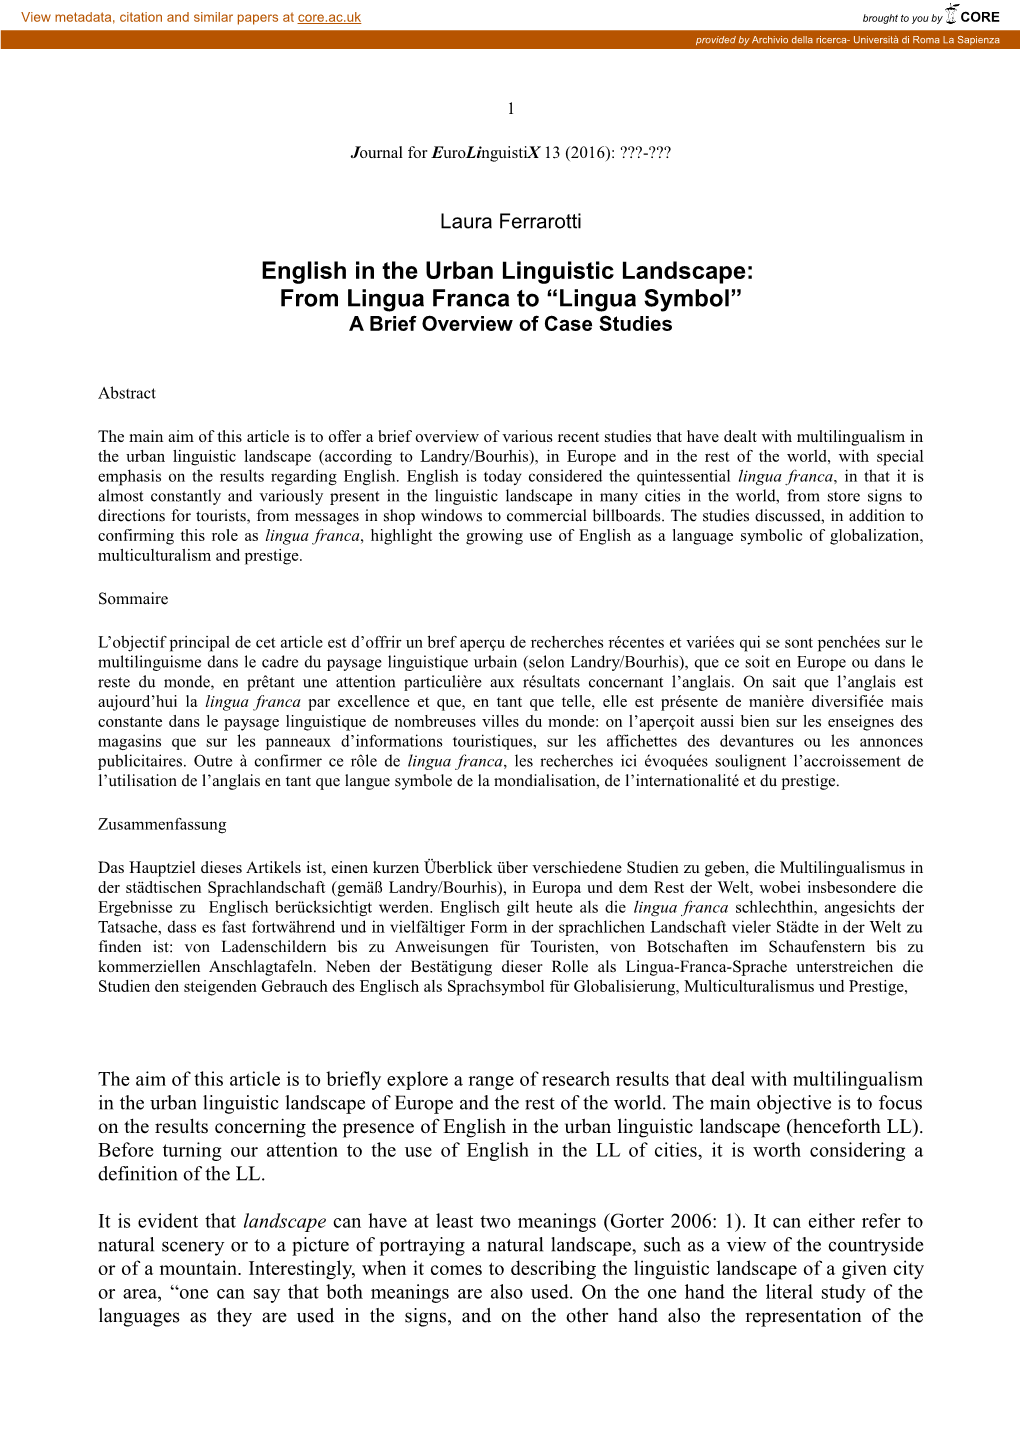 English in the Urban Linguistic Landscape: from Lingua Franca to “Lingua Symbol” a Brief Overview of Case Studies